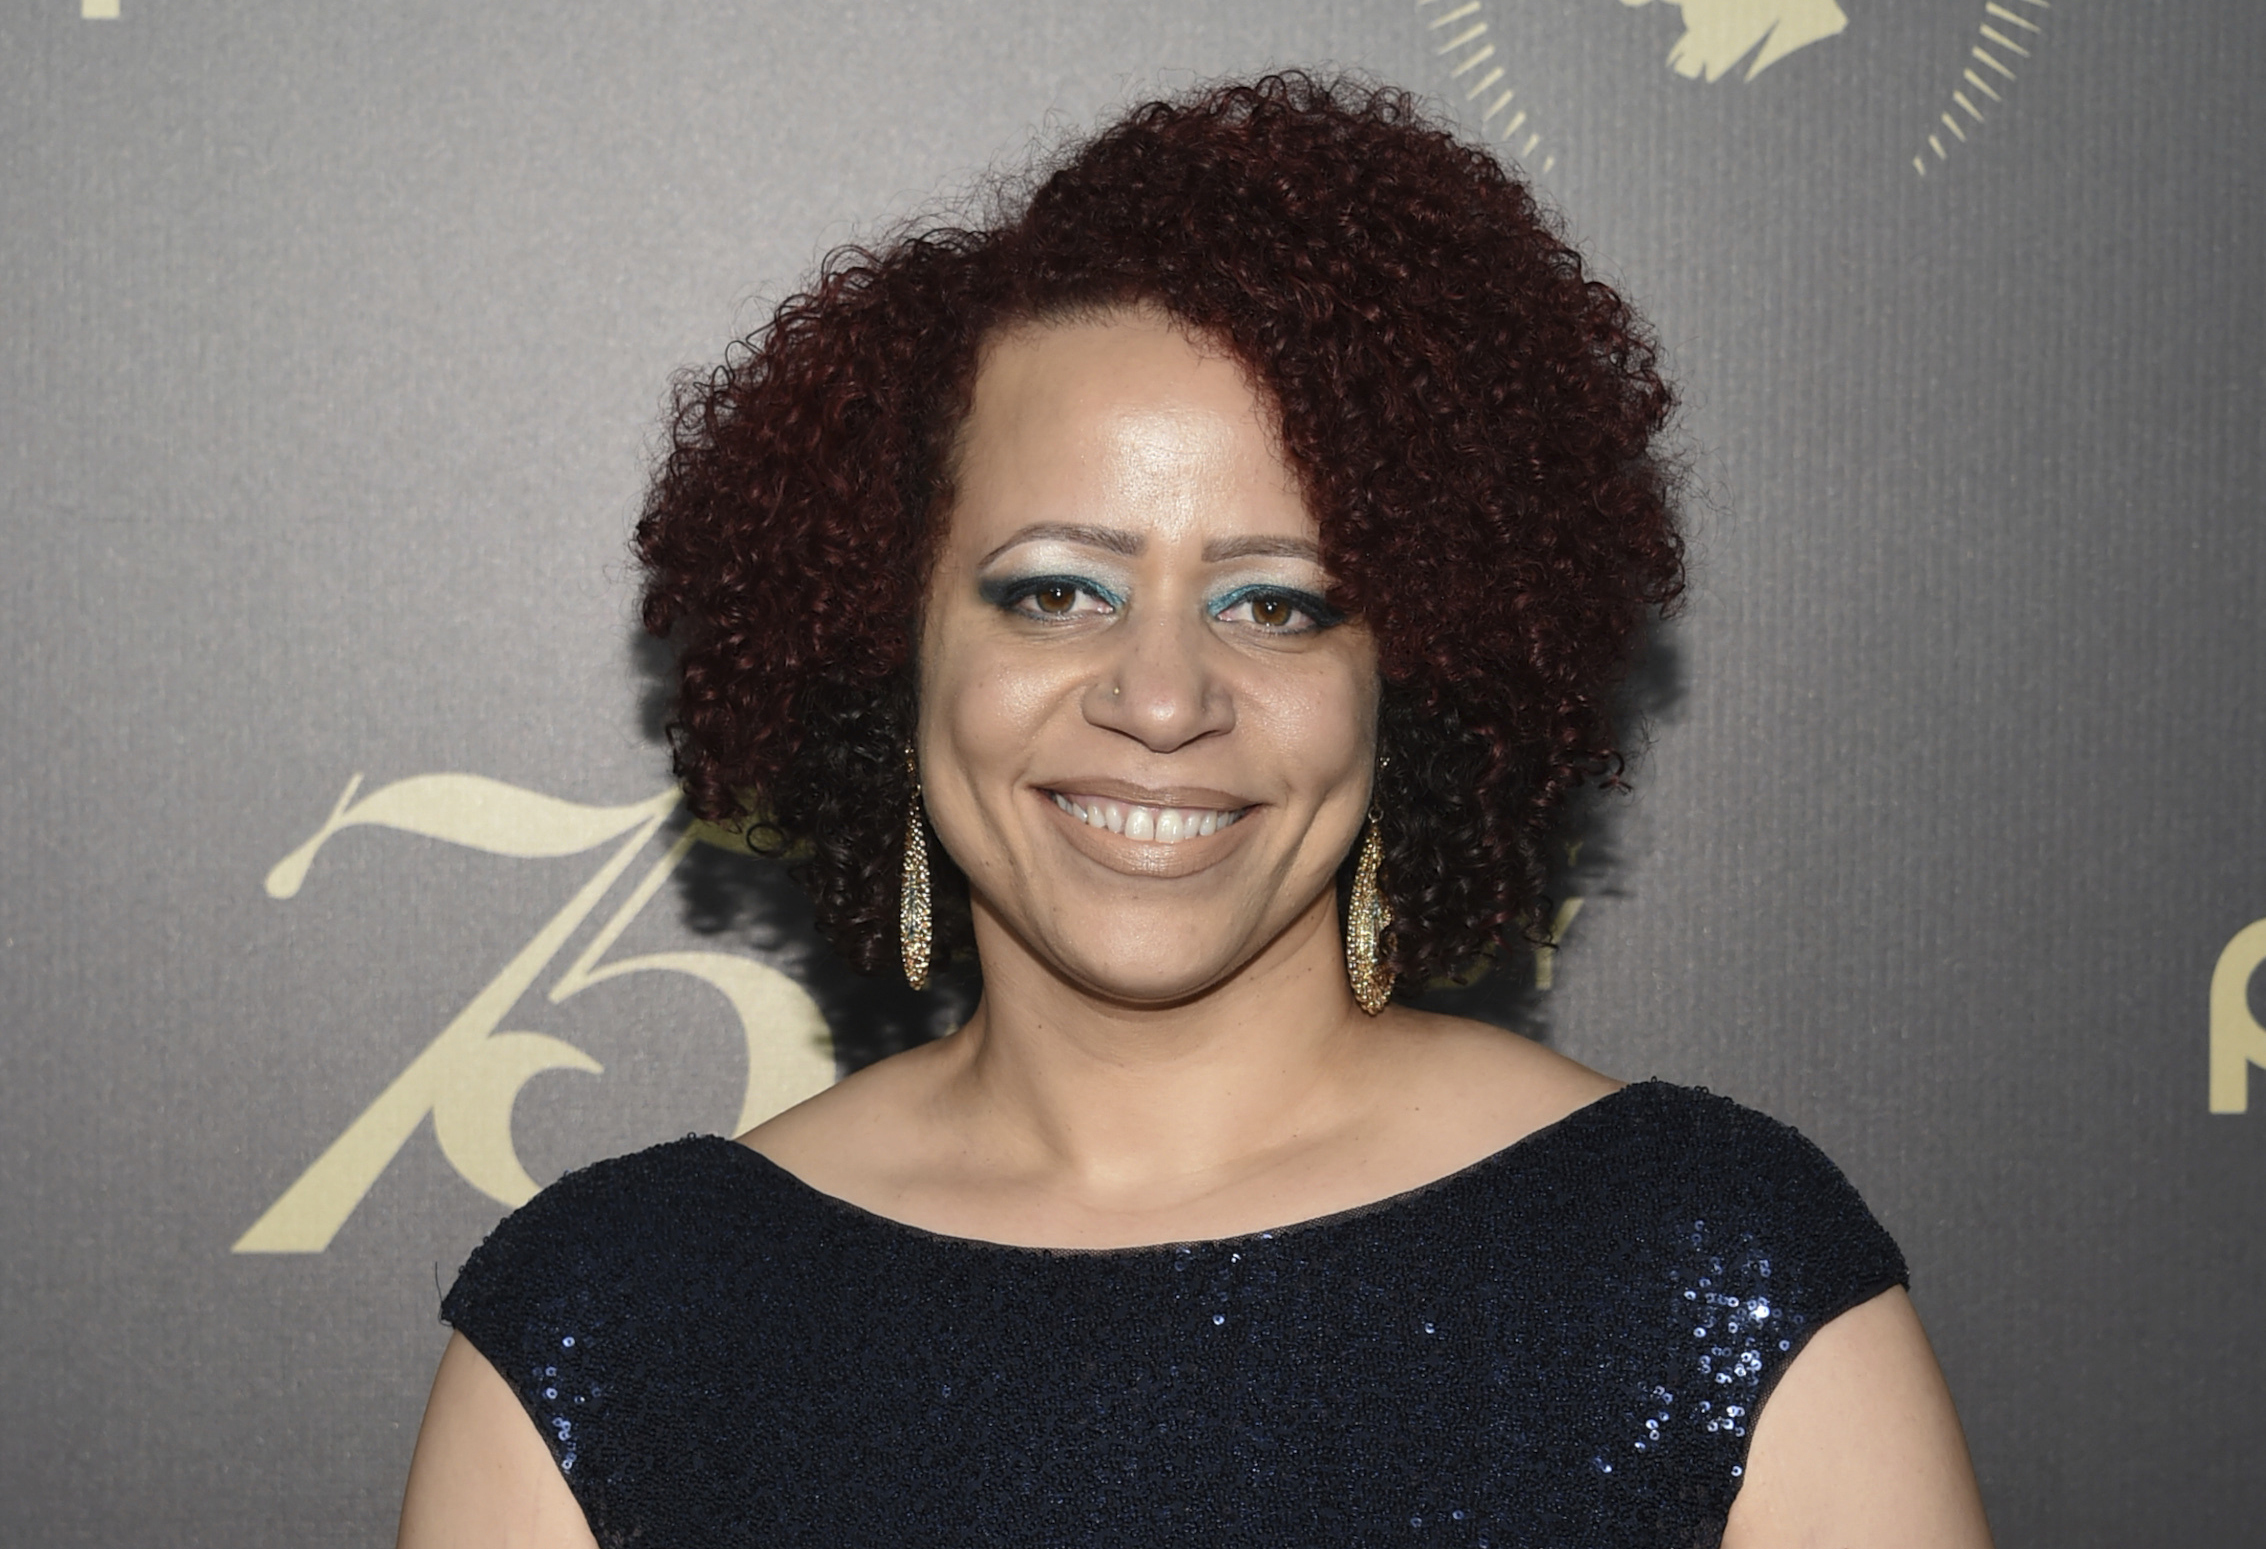 FILE - In this May 21, 2016, file photo, Nikole Hannah-Jones attends the 75th Annual Peabody Awards Ceremony at Cipriani Wall Street in New York. Long-standing grievances over the treatment of Black students, faculty and staff at the University of North Carolina at Chapel Hill have re-emerged in light of the controversy over investigative journalist Nikole Hannah-Jones. The Carolina Black Caucus recently wrote that faculty members are looking to leave over current conditions. (Photo by Evan Agostini/Invision/AP, File)